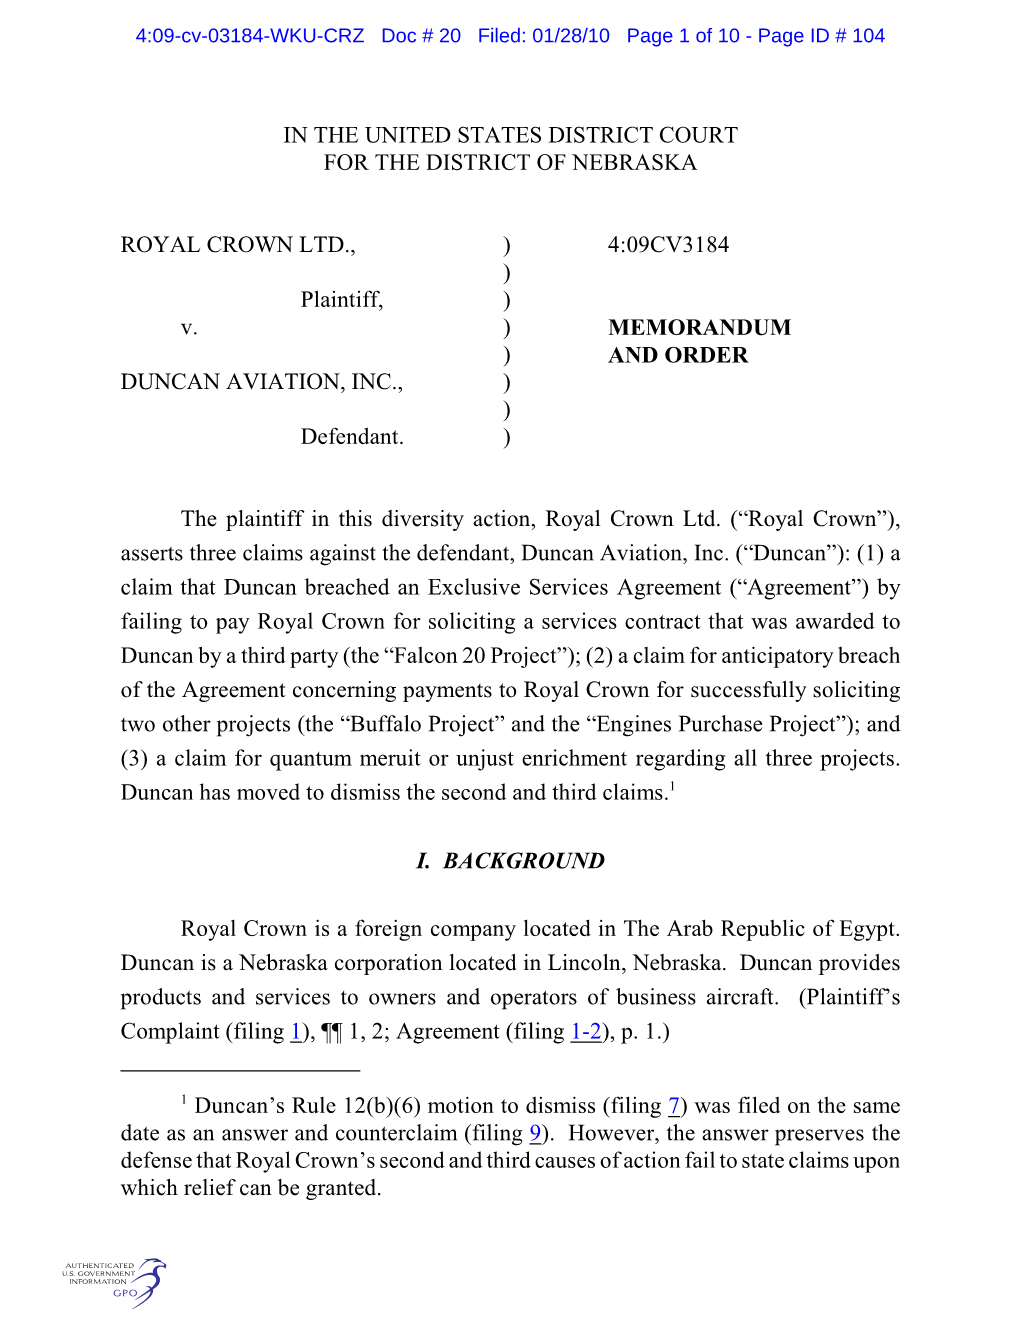 Duncan's Rule 12(B)(6) Motion to Dismiss (Filing 7) Was Filed on The